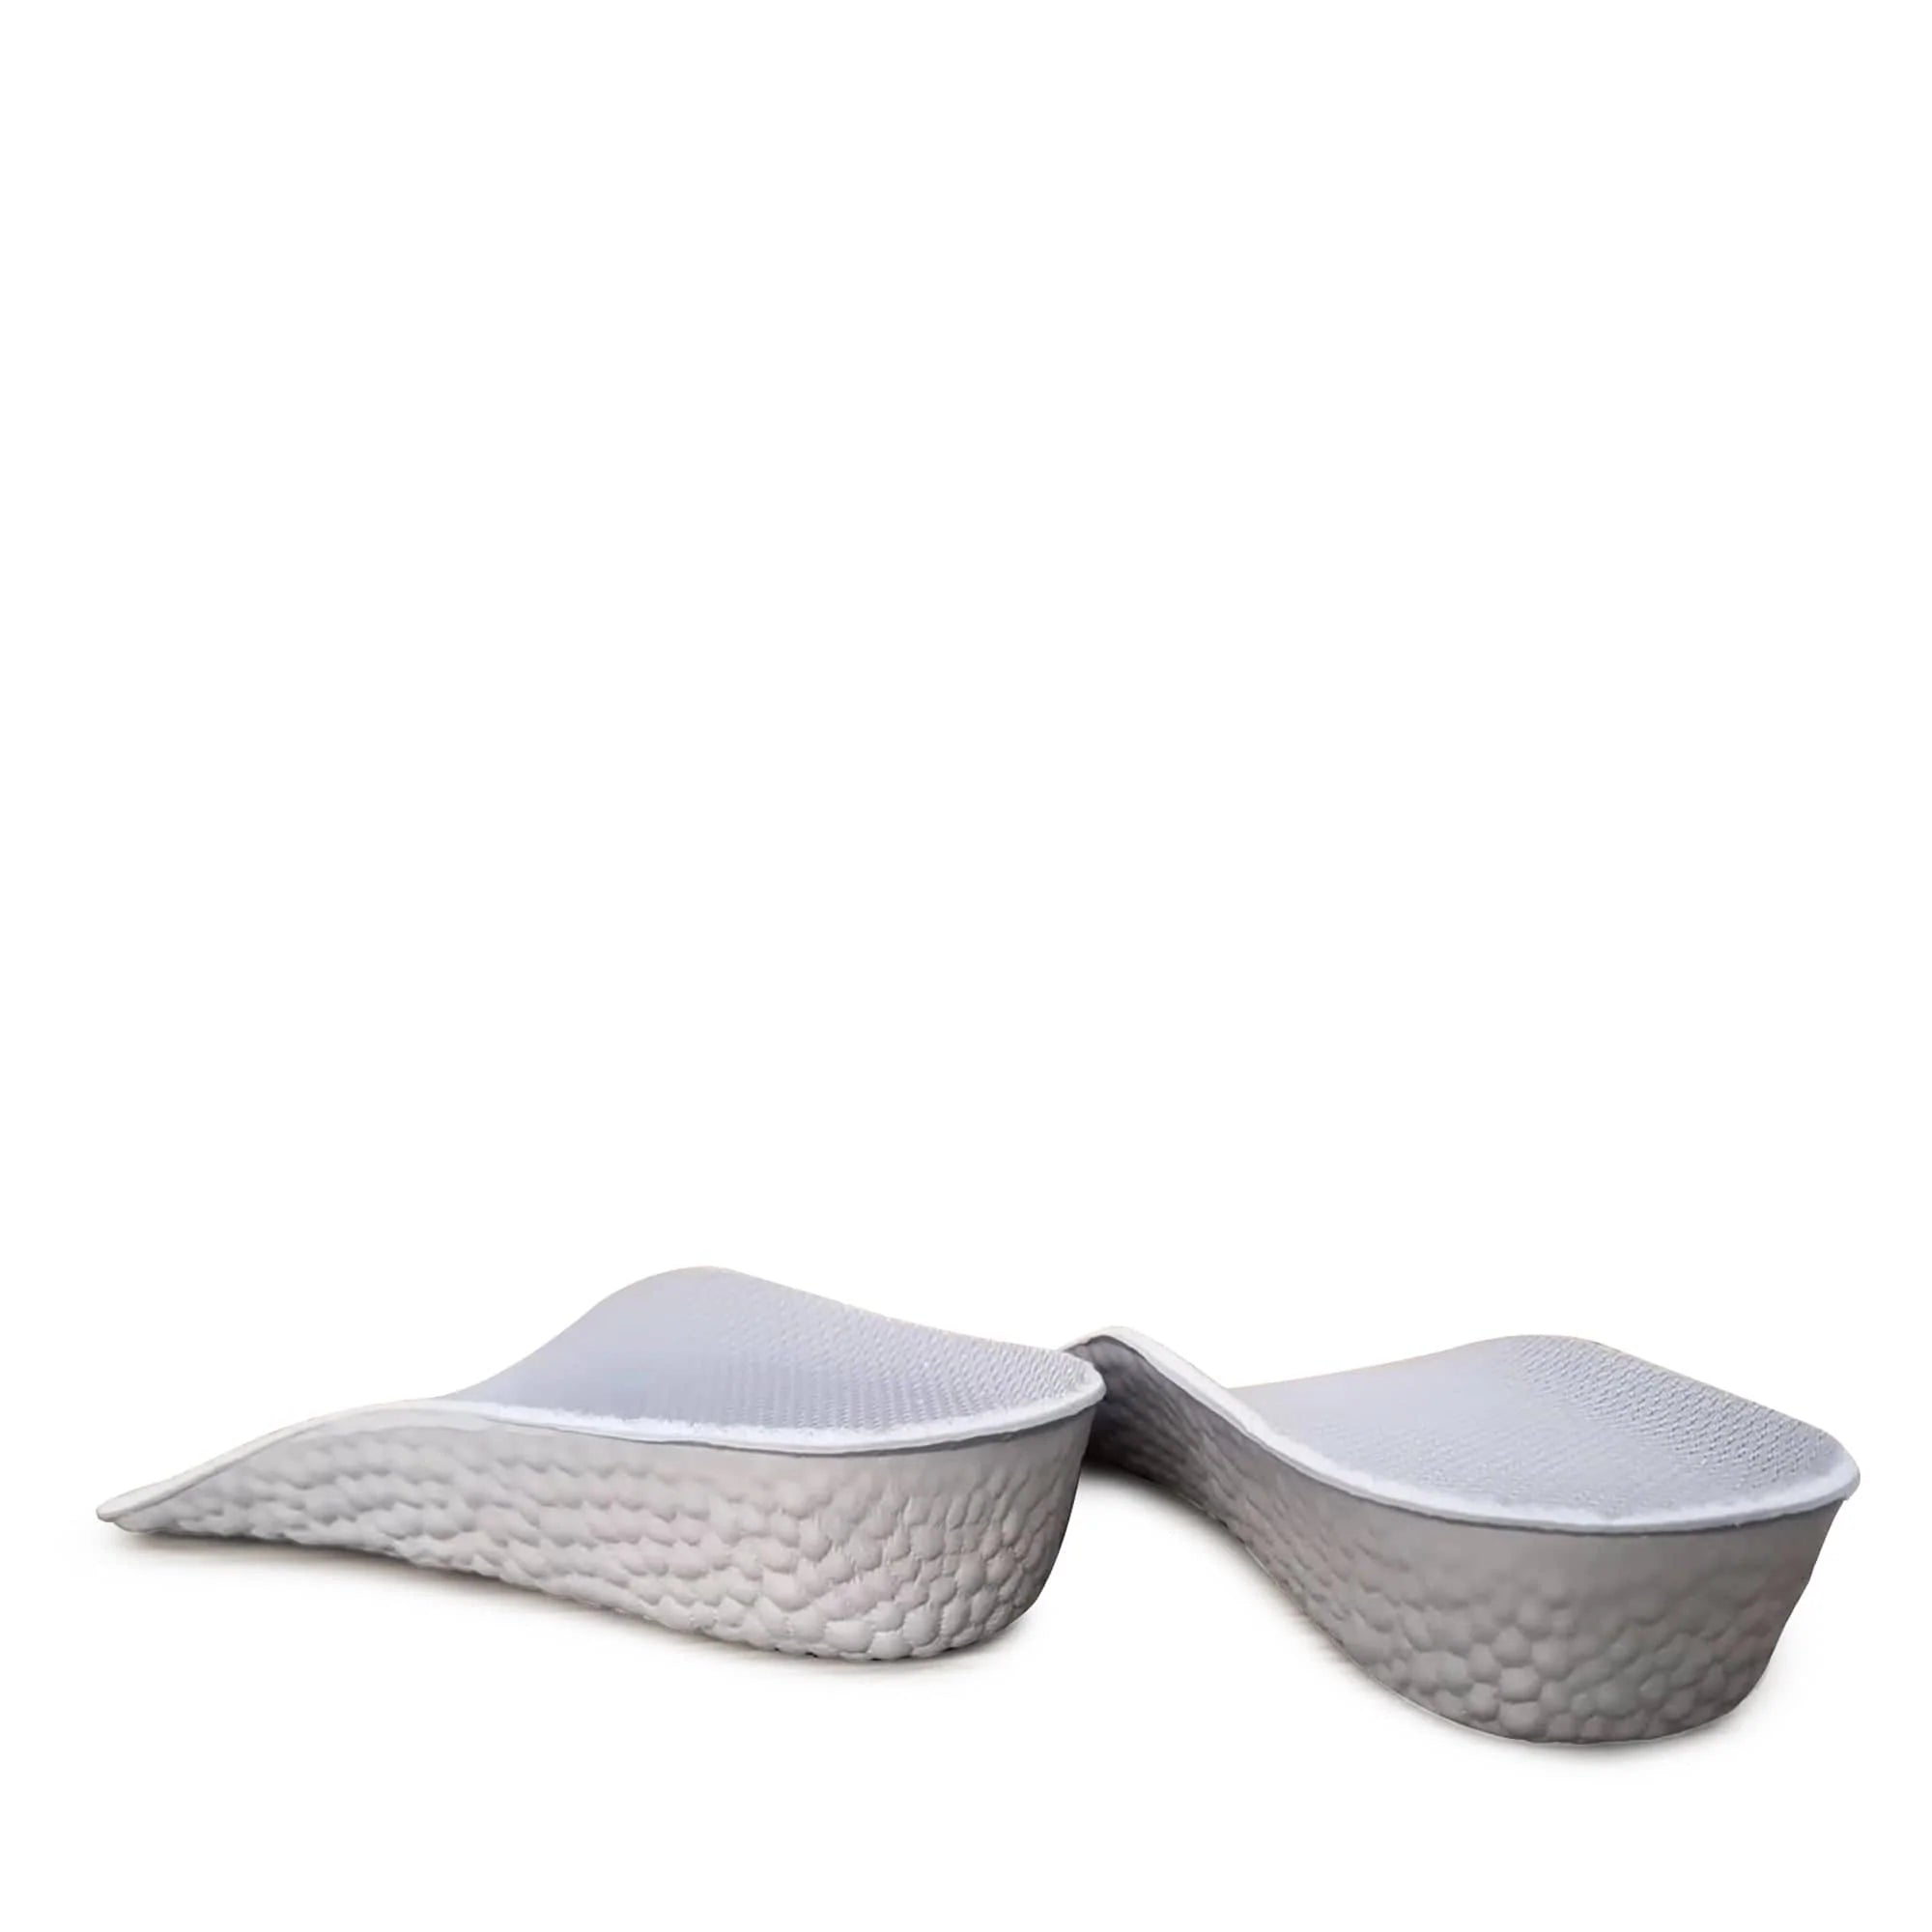  - Arch Support Invisible Heightening Insole - Original UGG Australia Classic